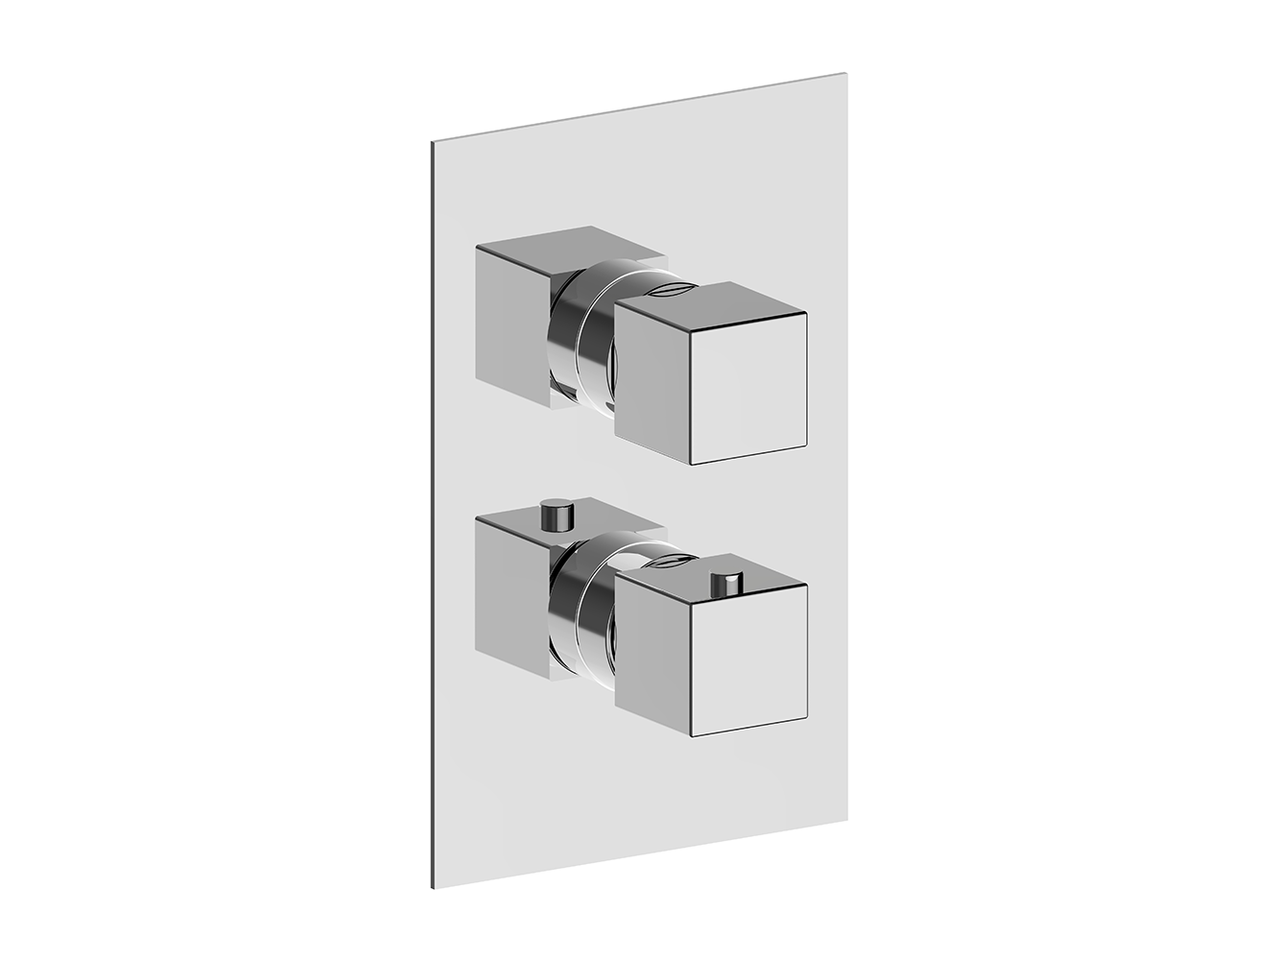 CisalExposed part for Thermostatic One Box Valve ONE BOX_WE0BT030